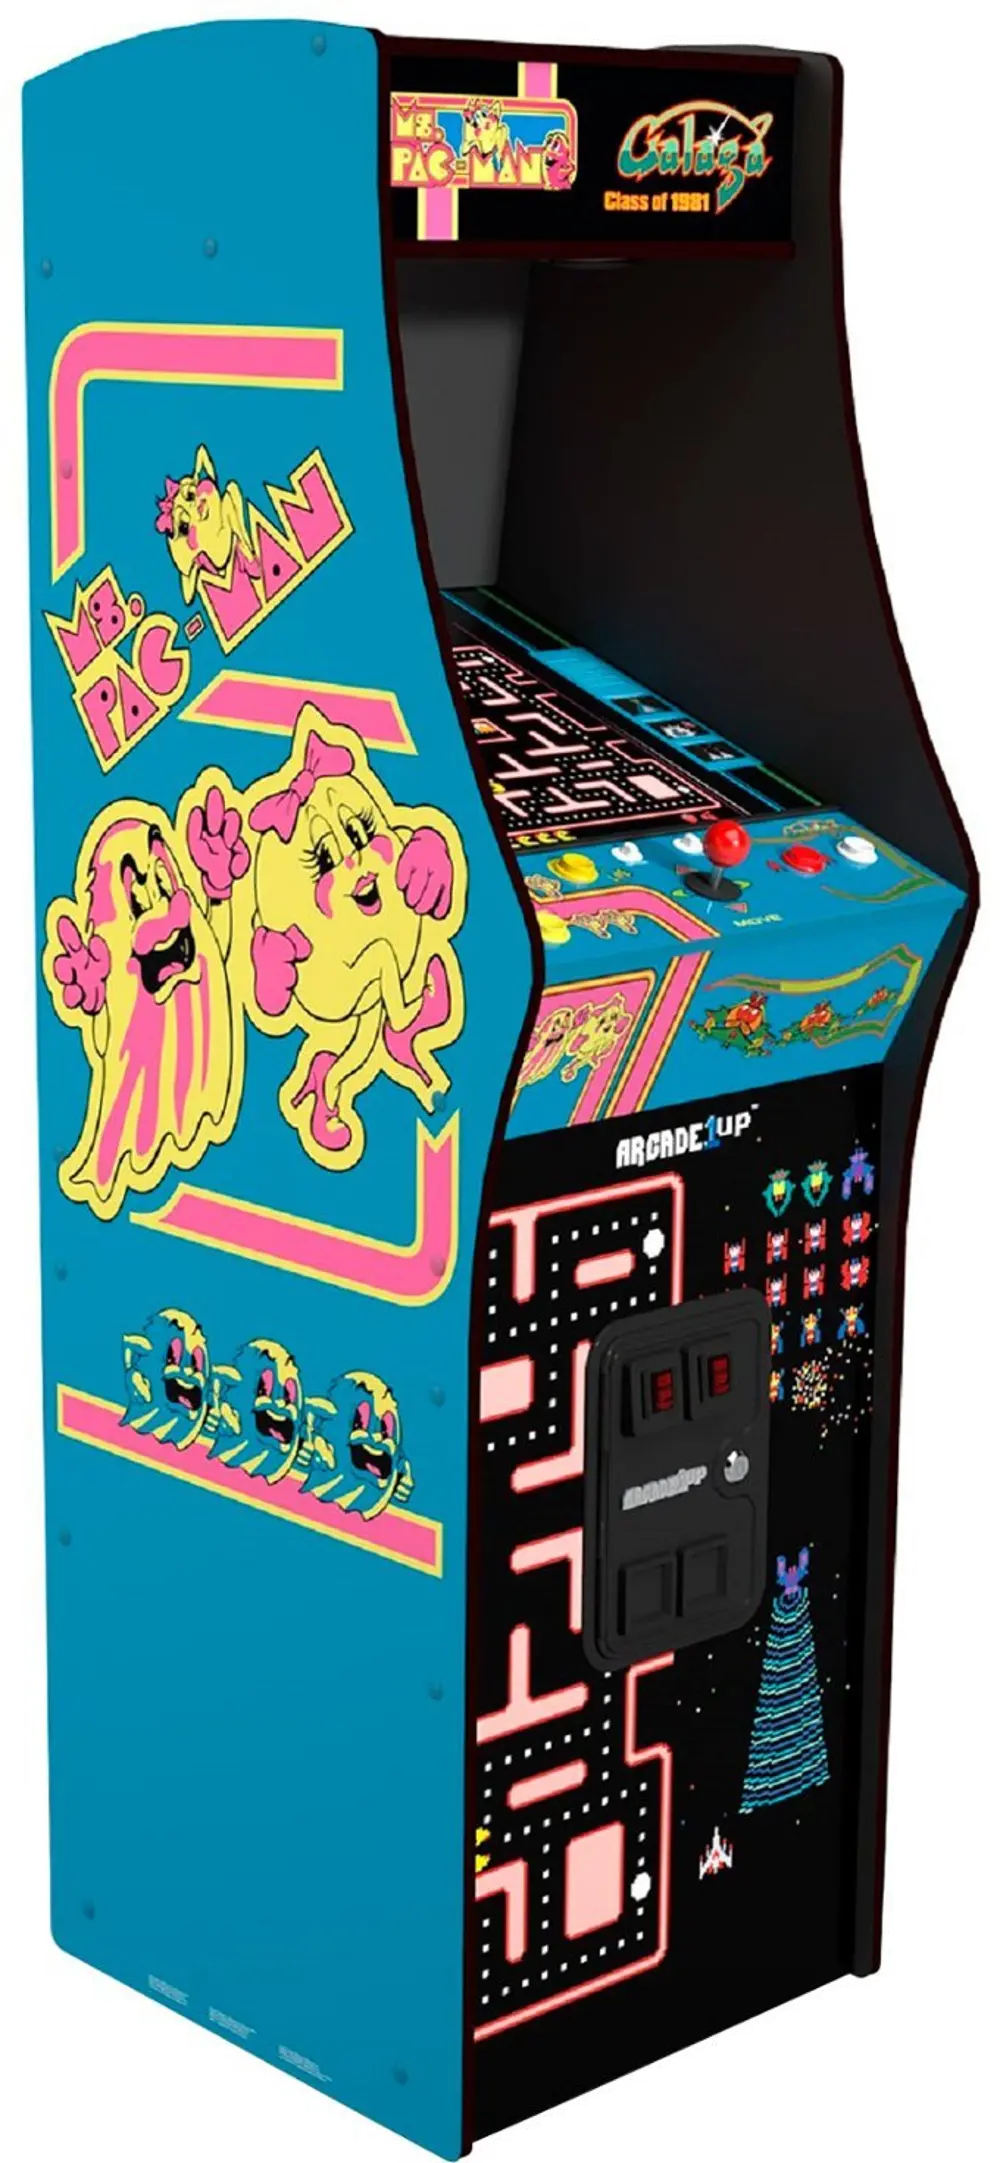 UPRIGHT/1981_DLX Arcade1Up Class of 81' Deluxe Arcade Game-1